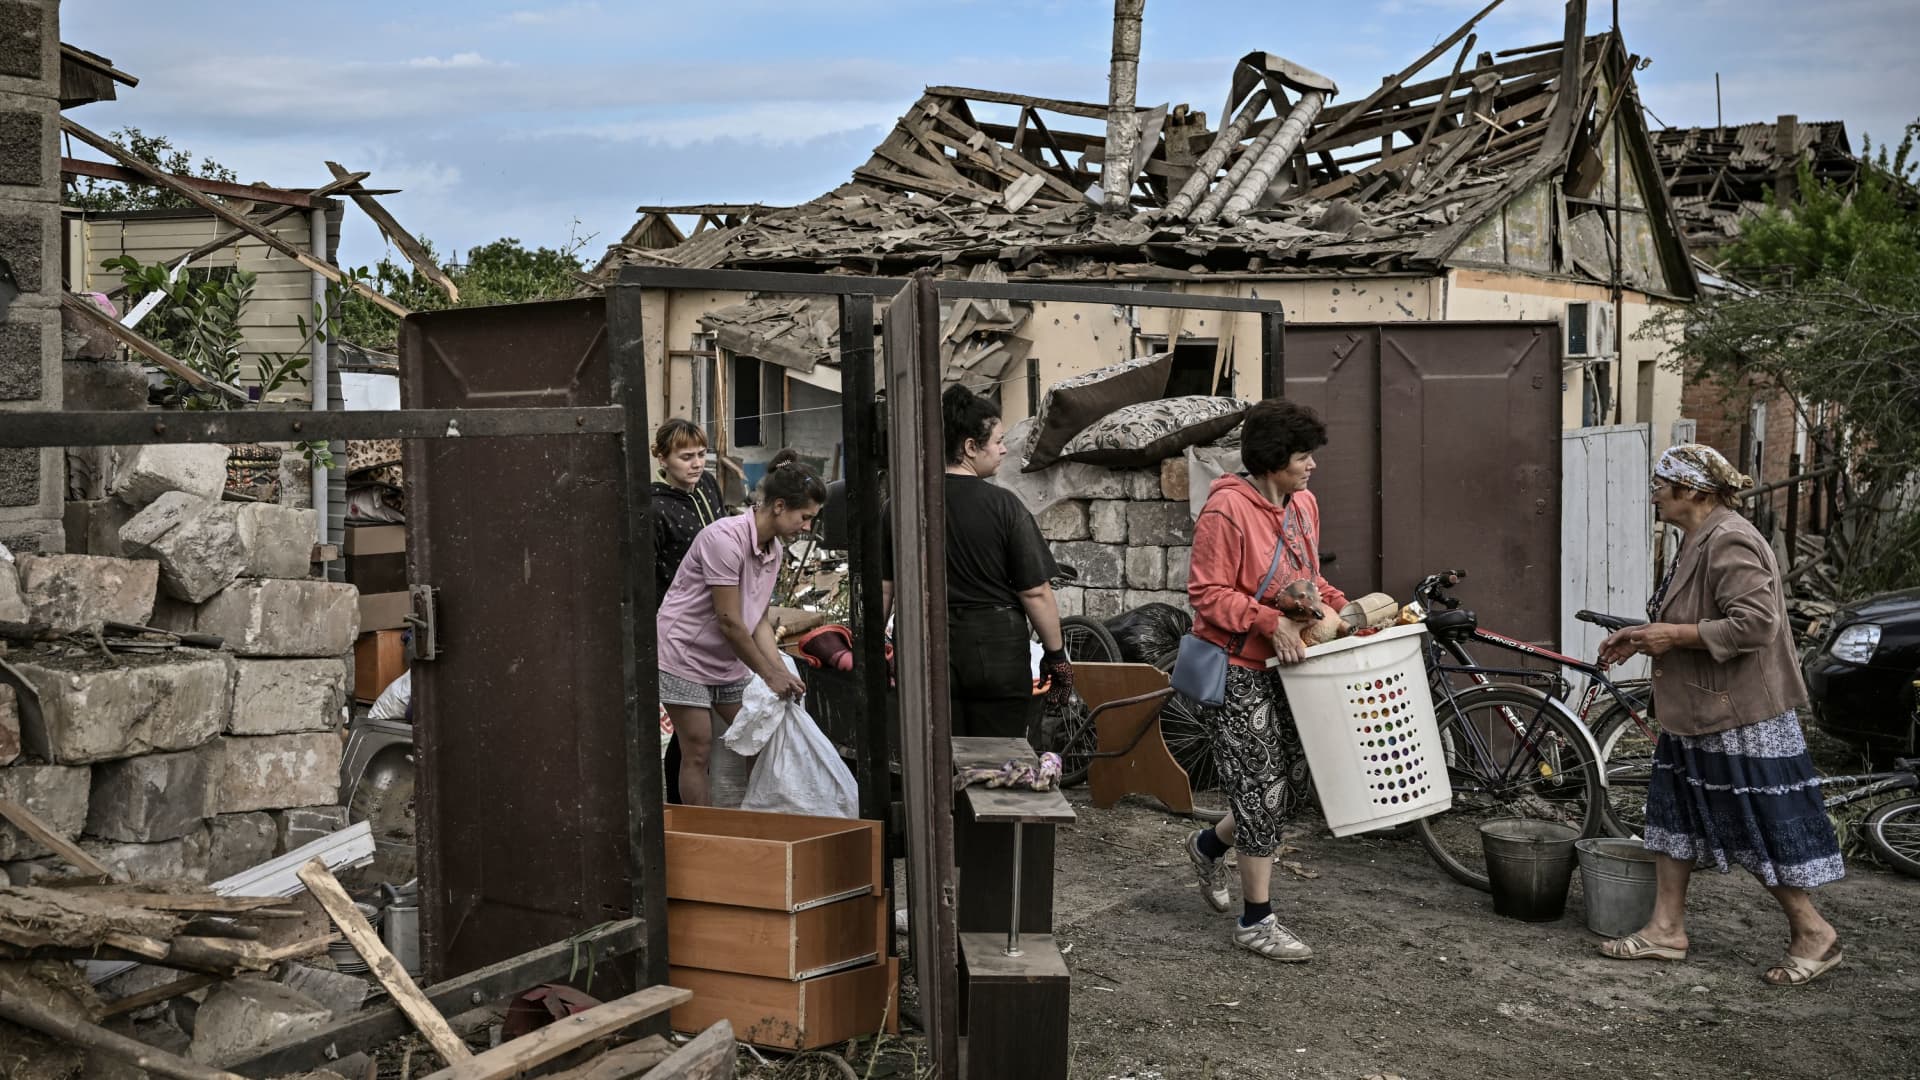 People collect personal belongings from their destroyed house after a missile strike, which killed an old woman, in the city of Druzhkivka (also written Druzhkovka) in the eastern Ukrainian region of Donbas on June 5, 2022.